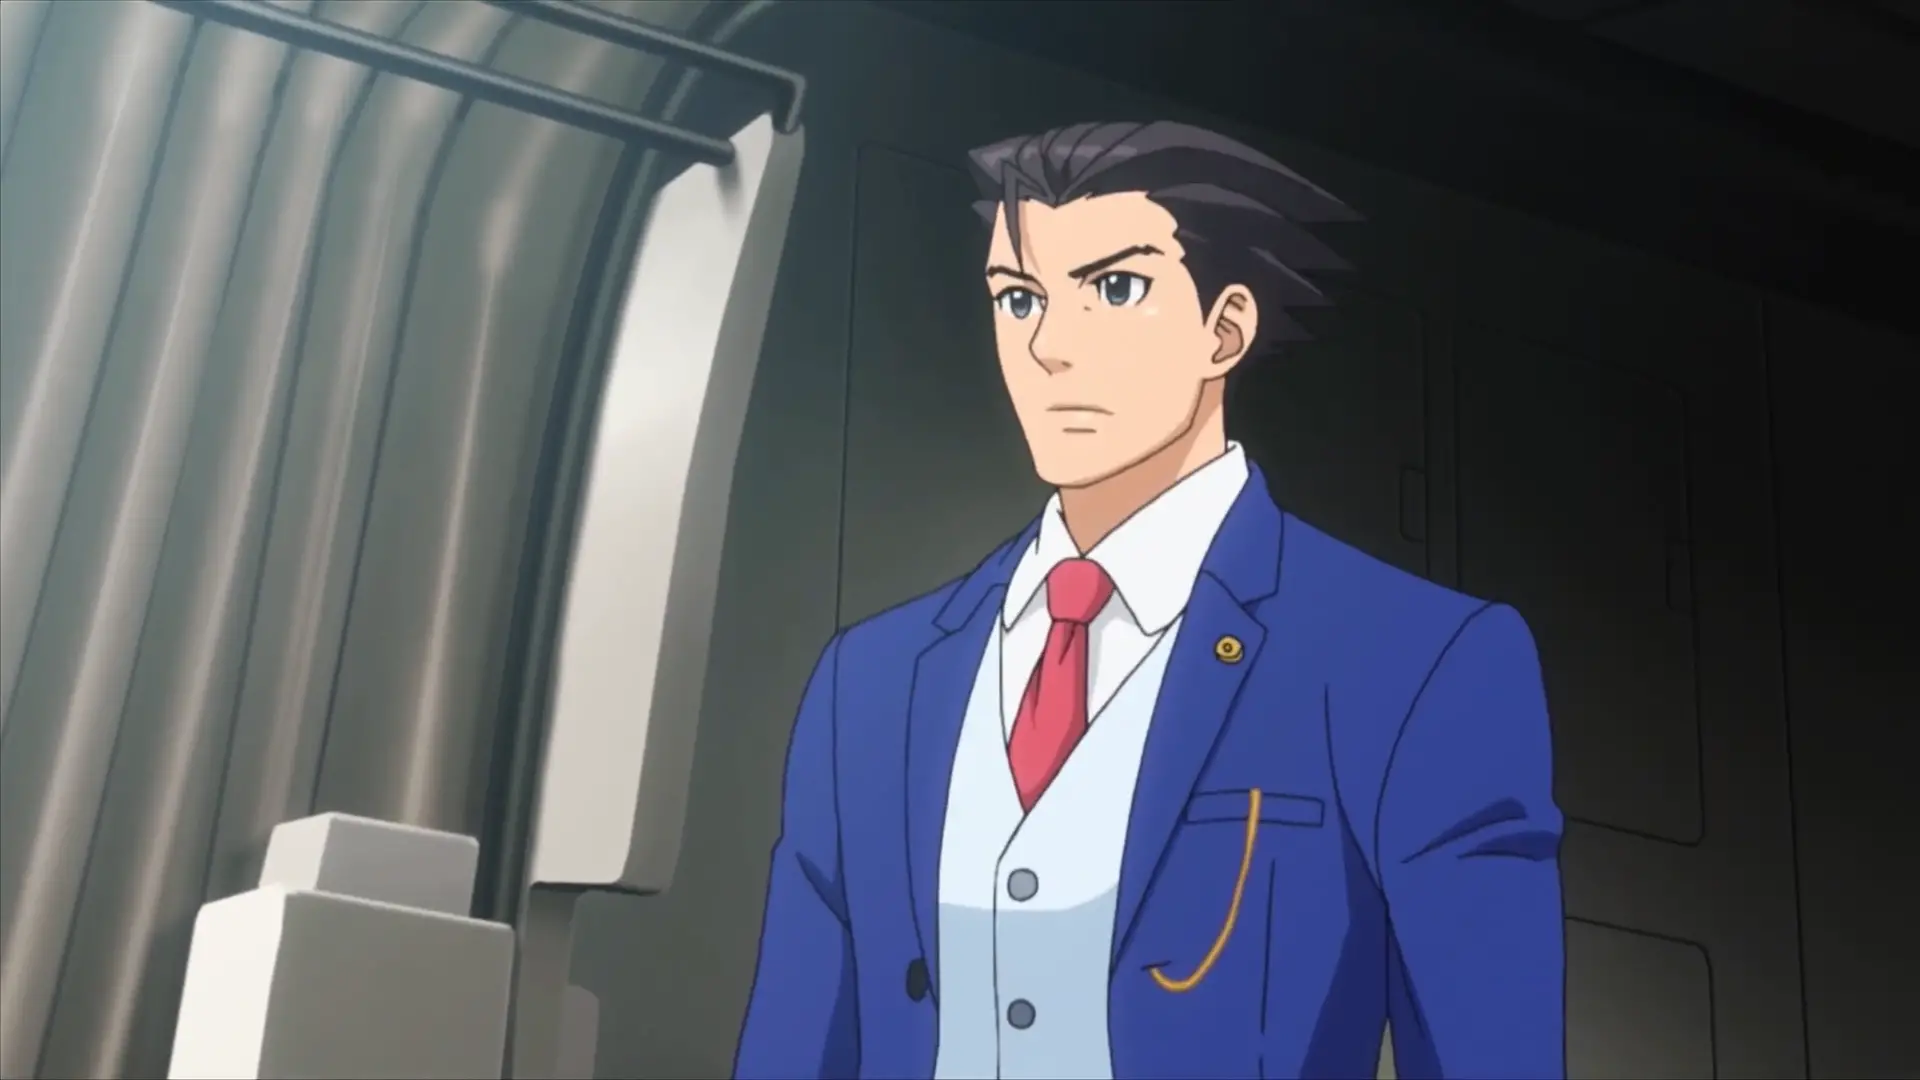 Apollo Justice: Ace Attorney Trilogy English Trailer Introduces Spirit of Justice Case 1, “The Foreign Turnabout”